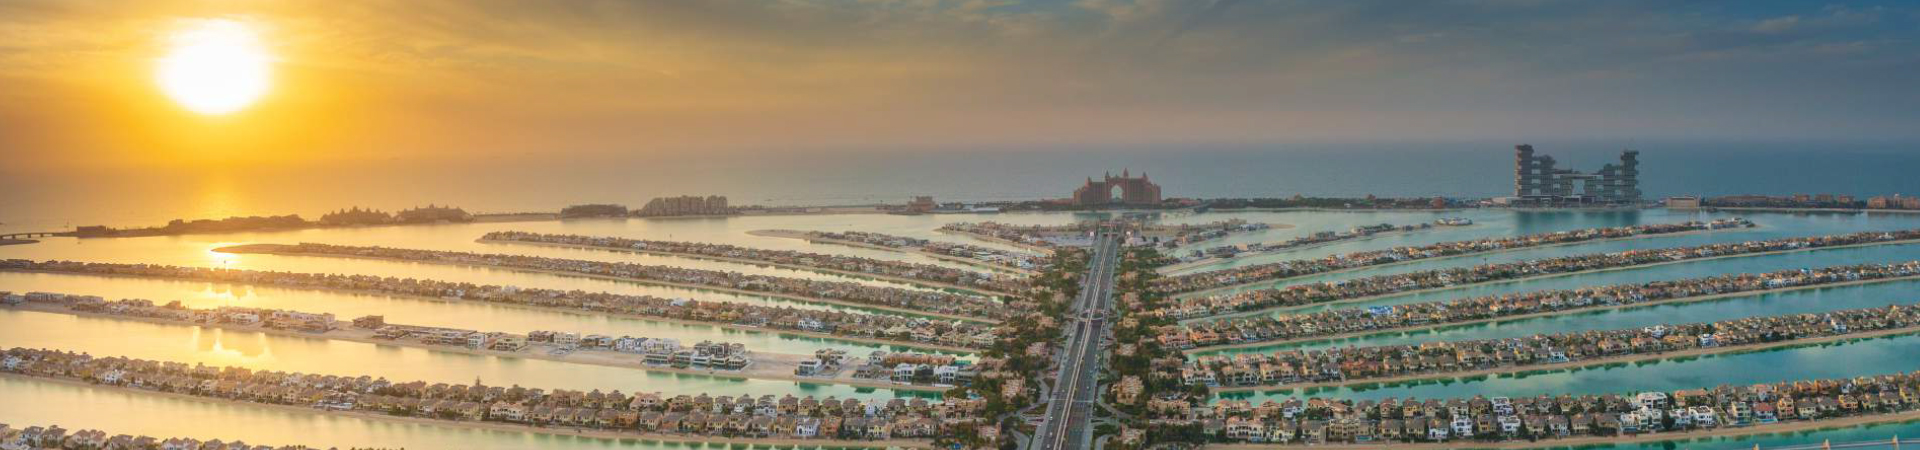 The Palm Tower by Nakheel gallery 4